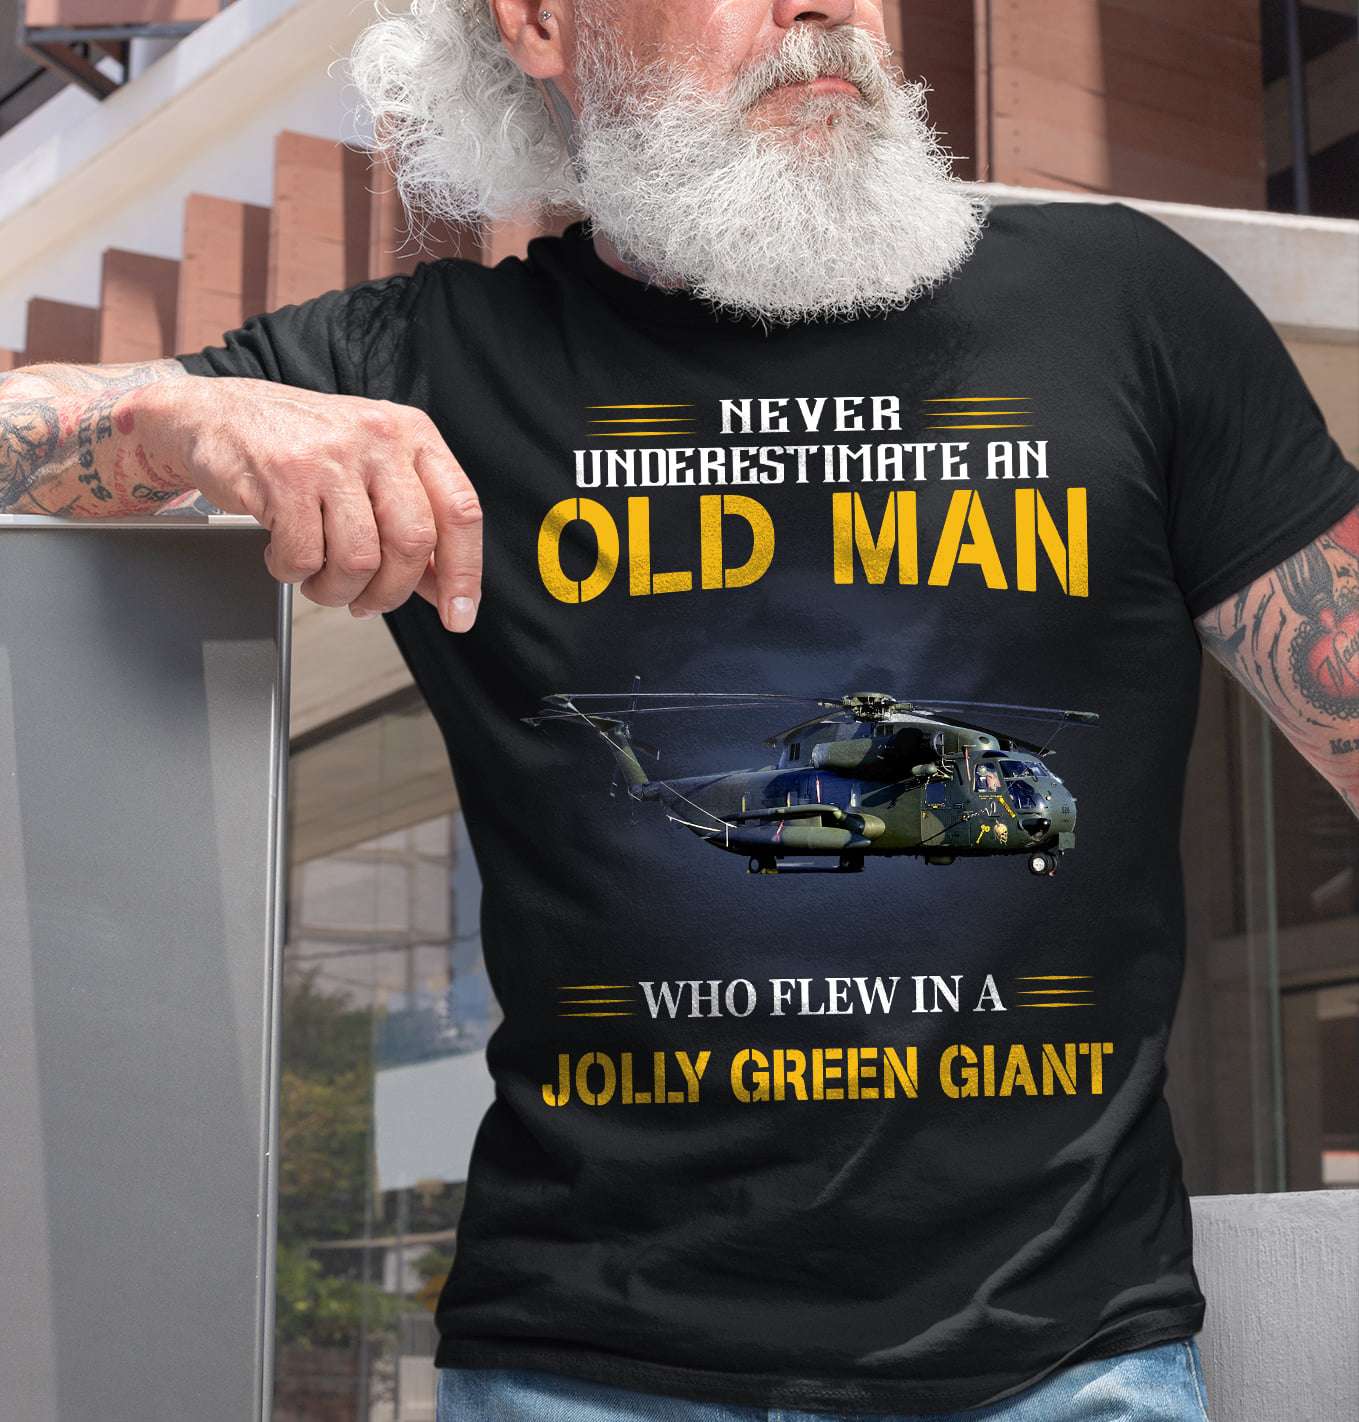 Never underestimate an old man who flew in a Jolly green giant - Old man helicopter